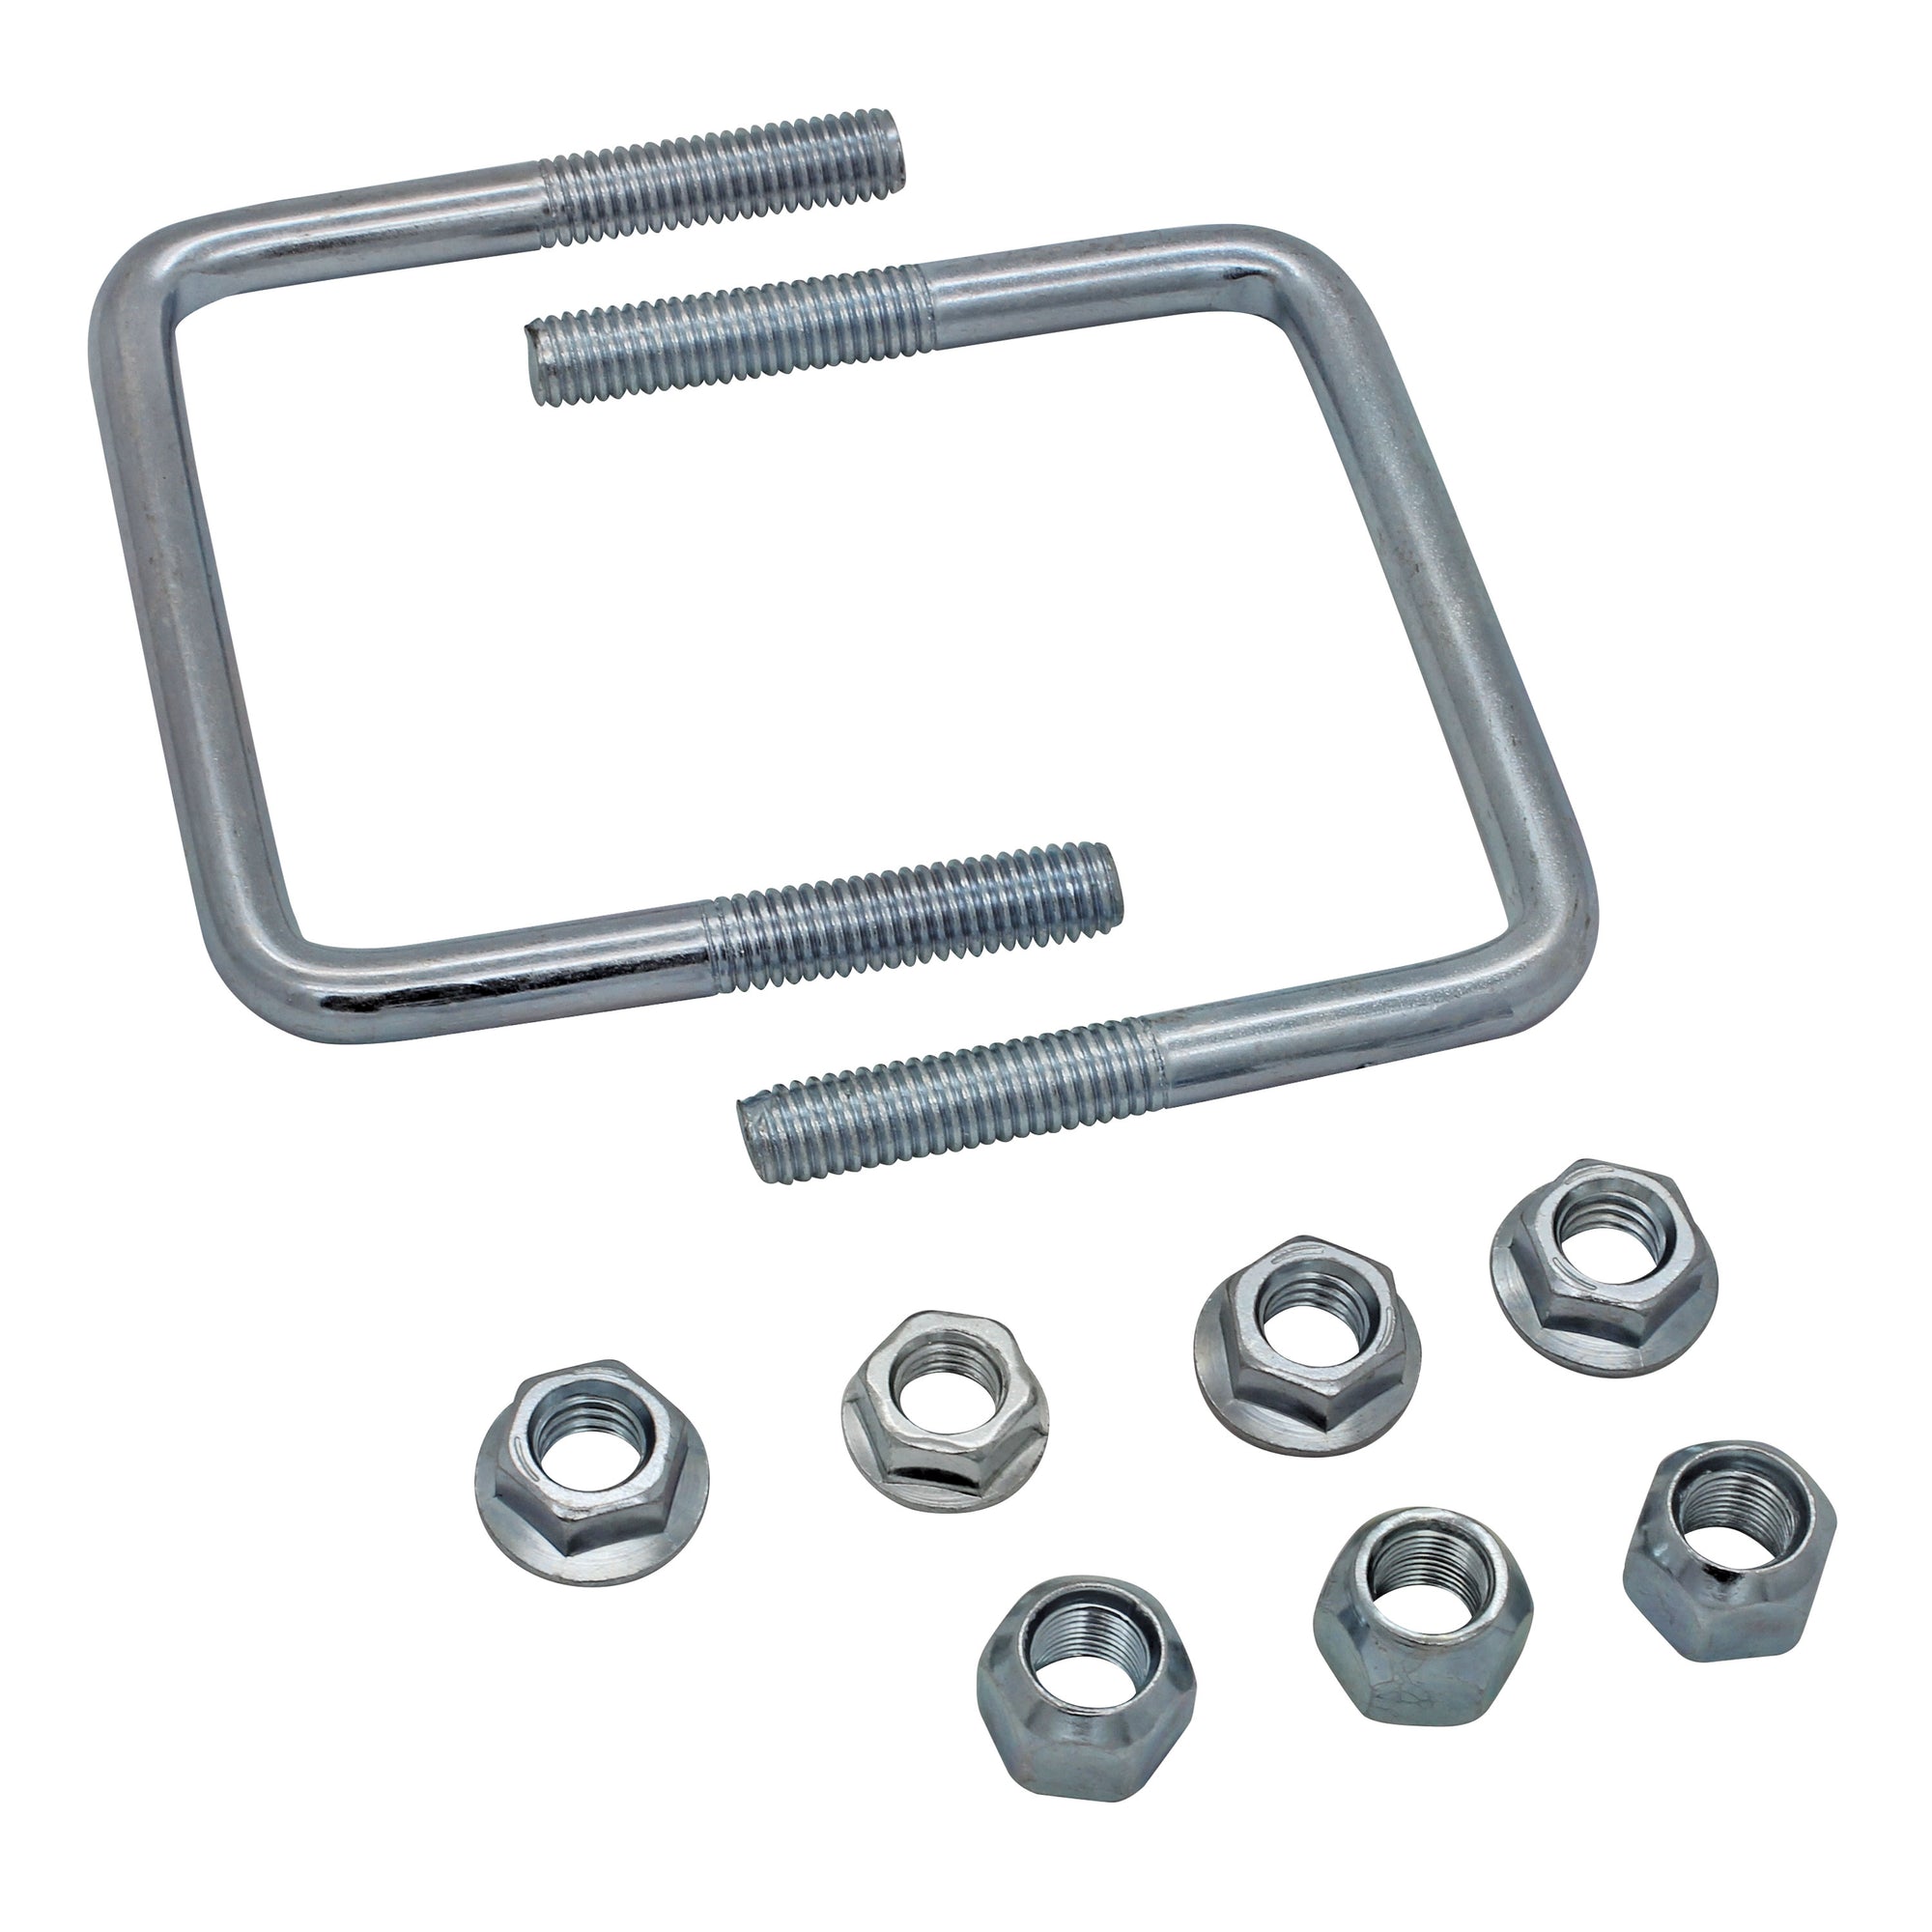 Extreme Max 3001.4130 Hardware Kit for High-Mount Spare Tire Carrier (3001.0064) - 4"